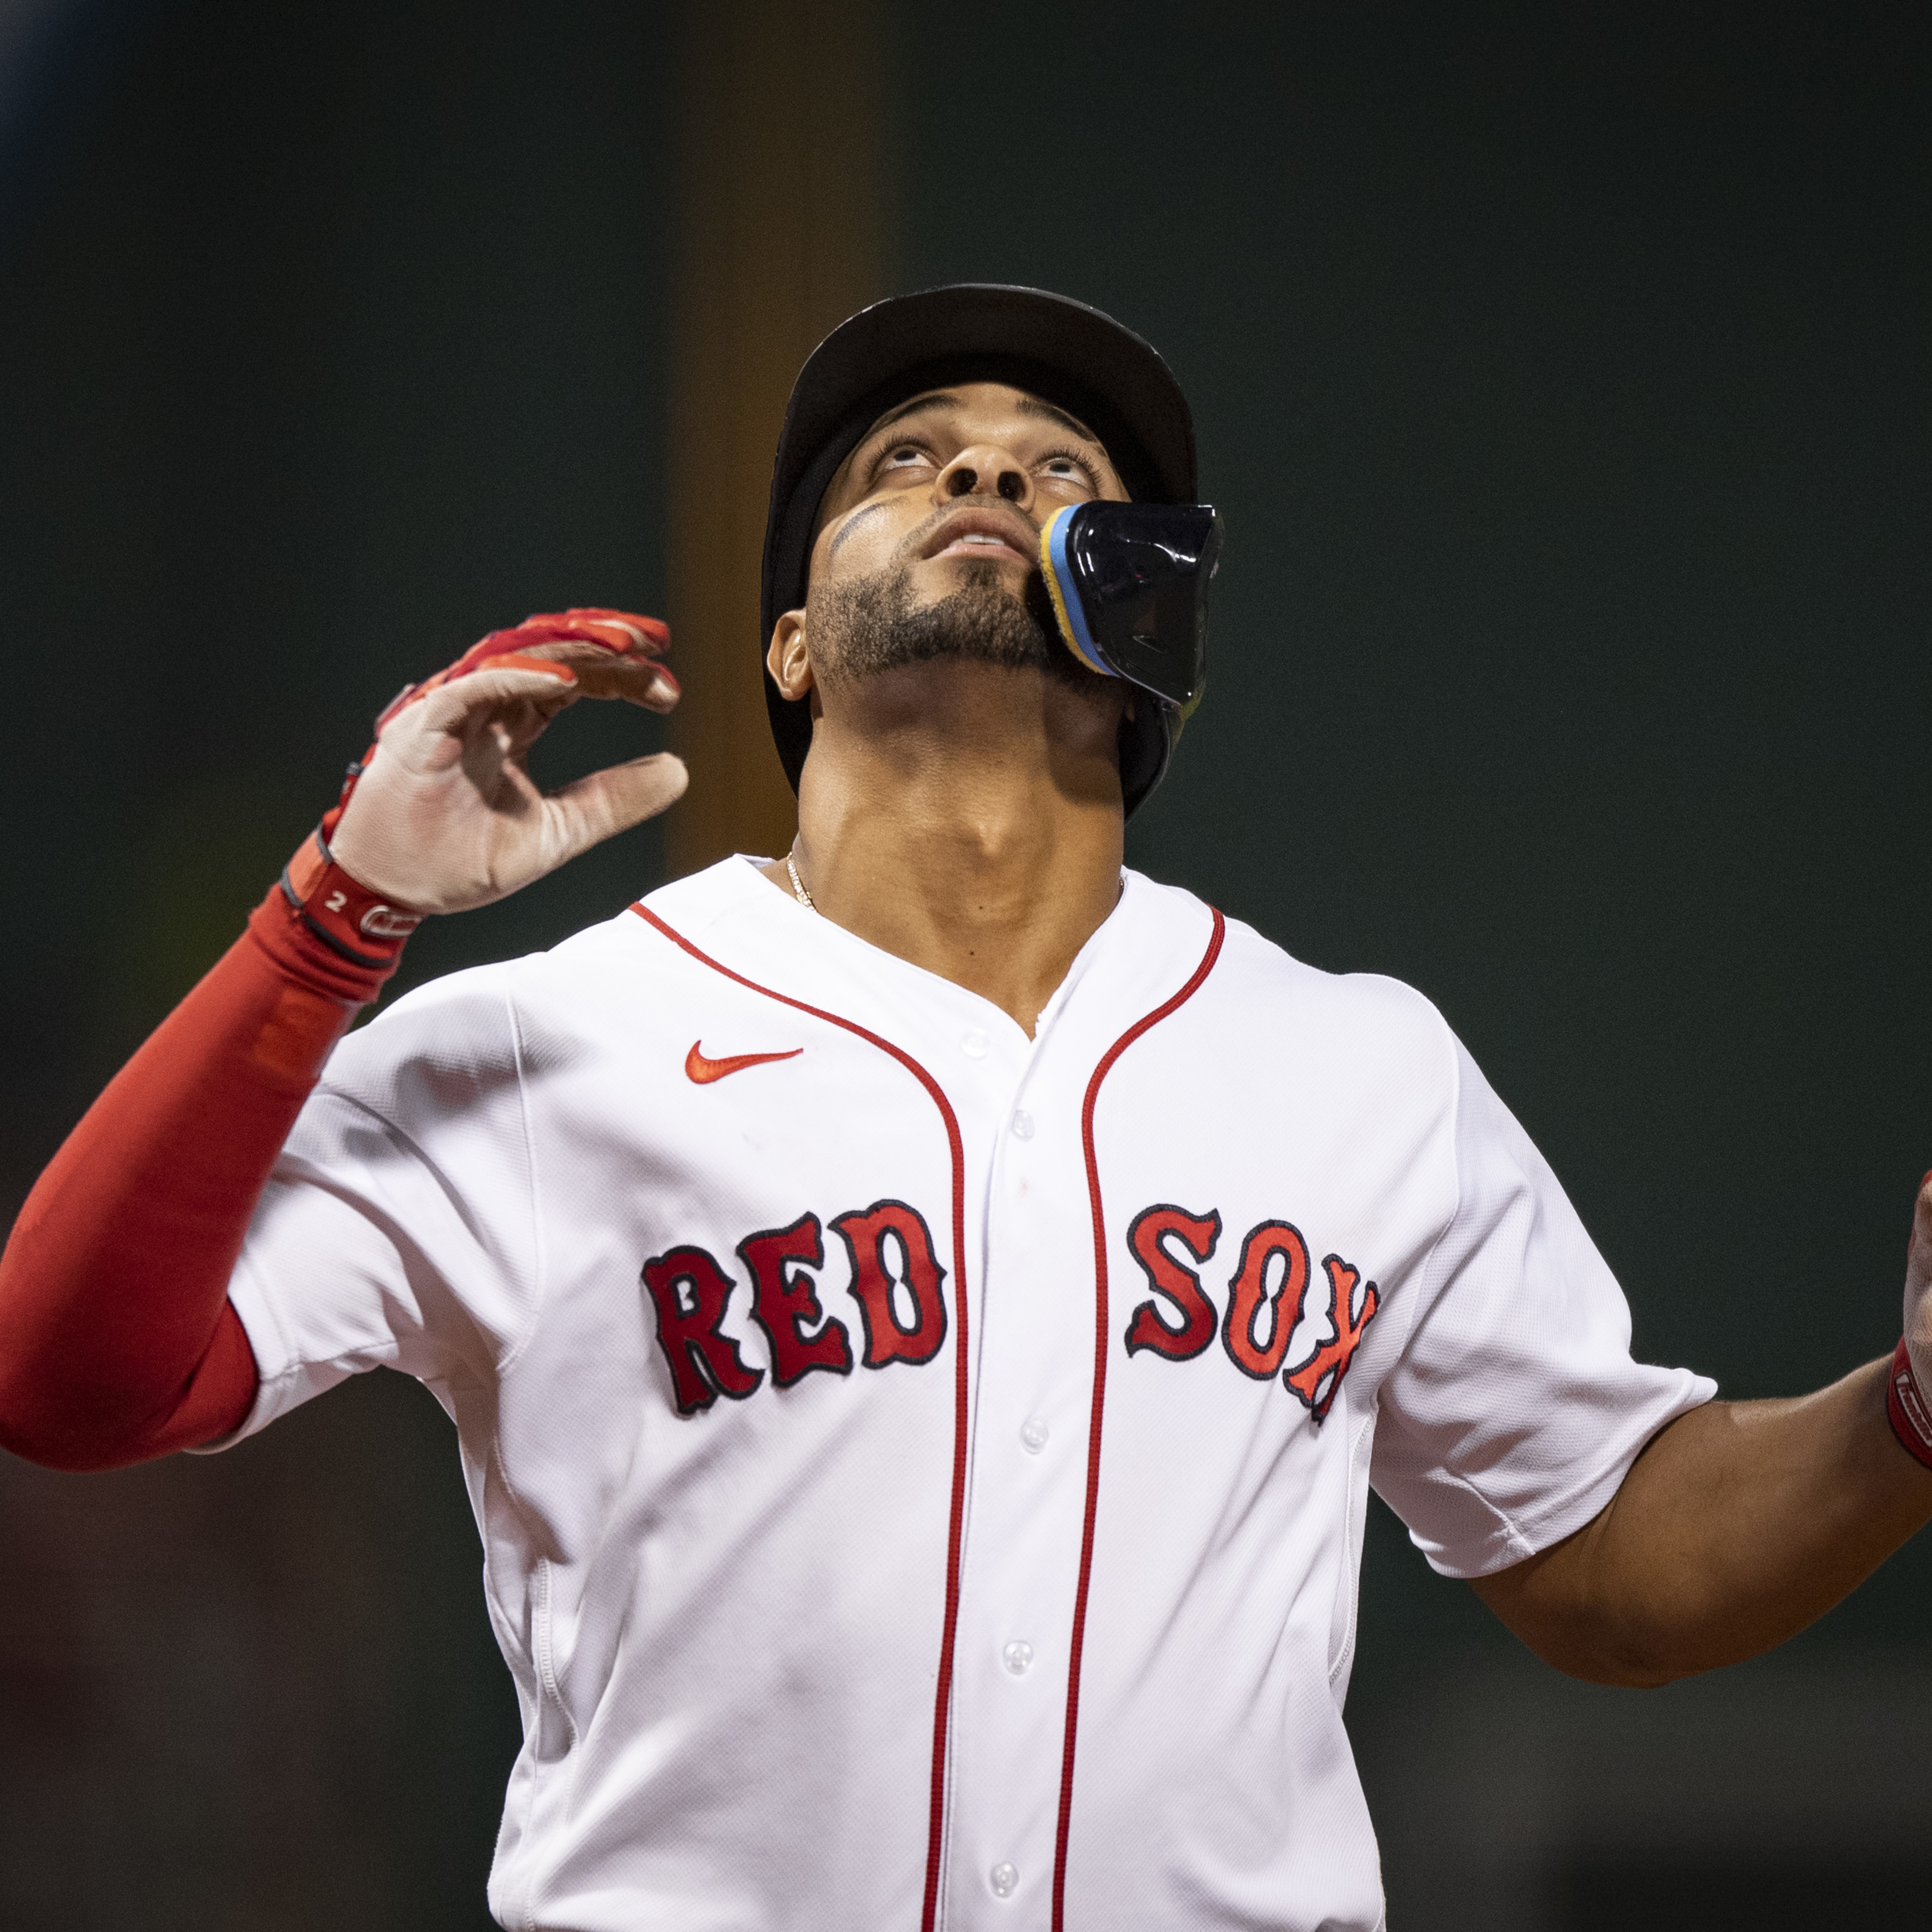 Xander Bogaerts' Agent Says Red Sox Contract Talks Will Wait Until After Season